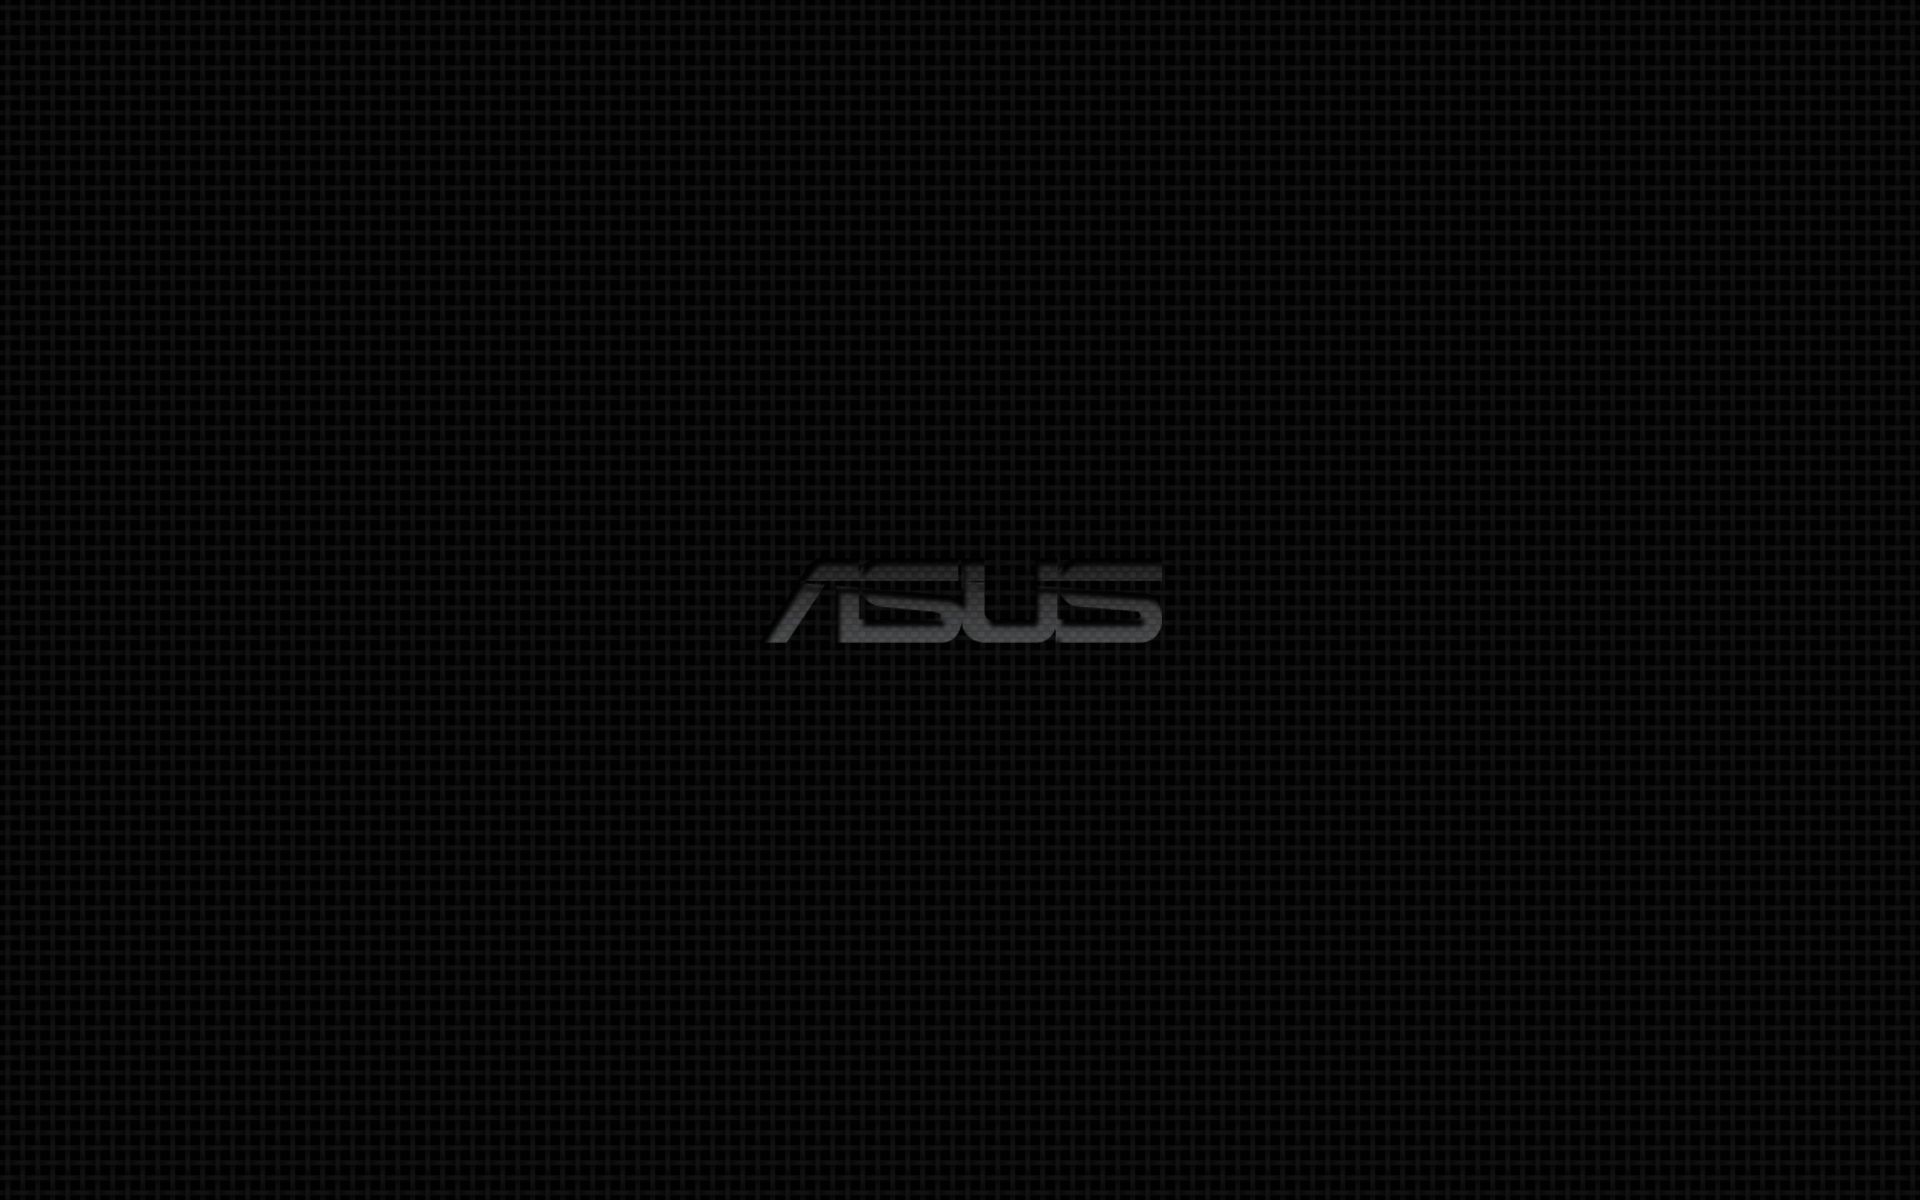 Top I7 Asus Wallpaper 1920x1200 Images for Pinterest